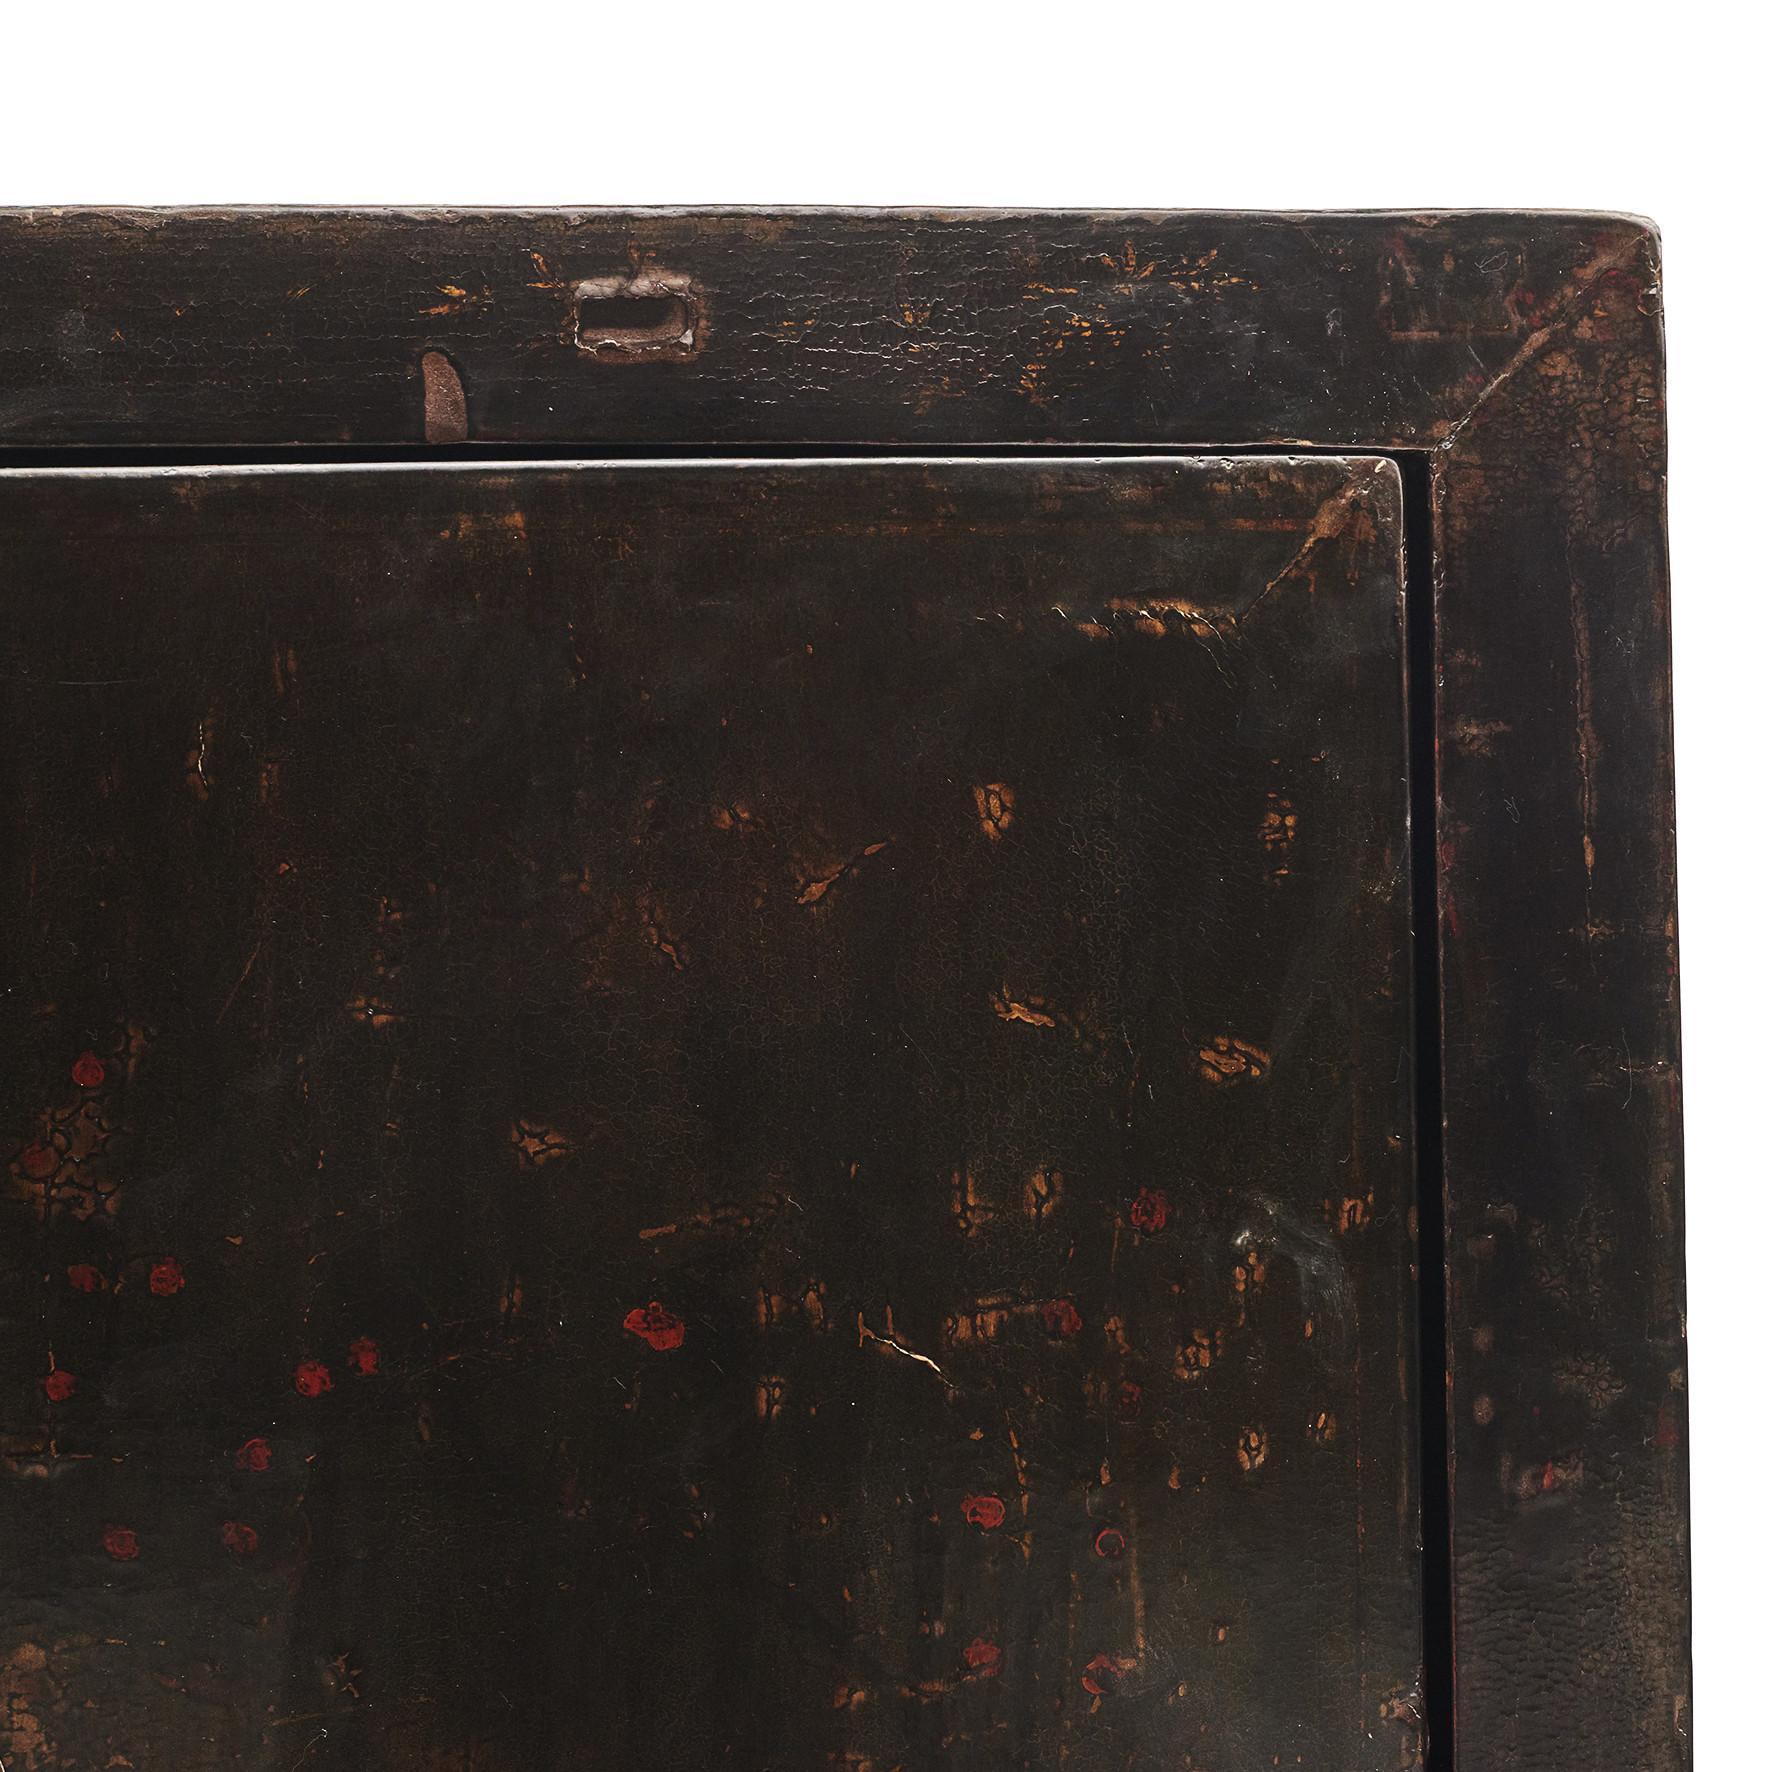 19th Century Black/Brown Chinese Qing Dynasty Period Cabinet from Shanxi, 1800-1820